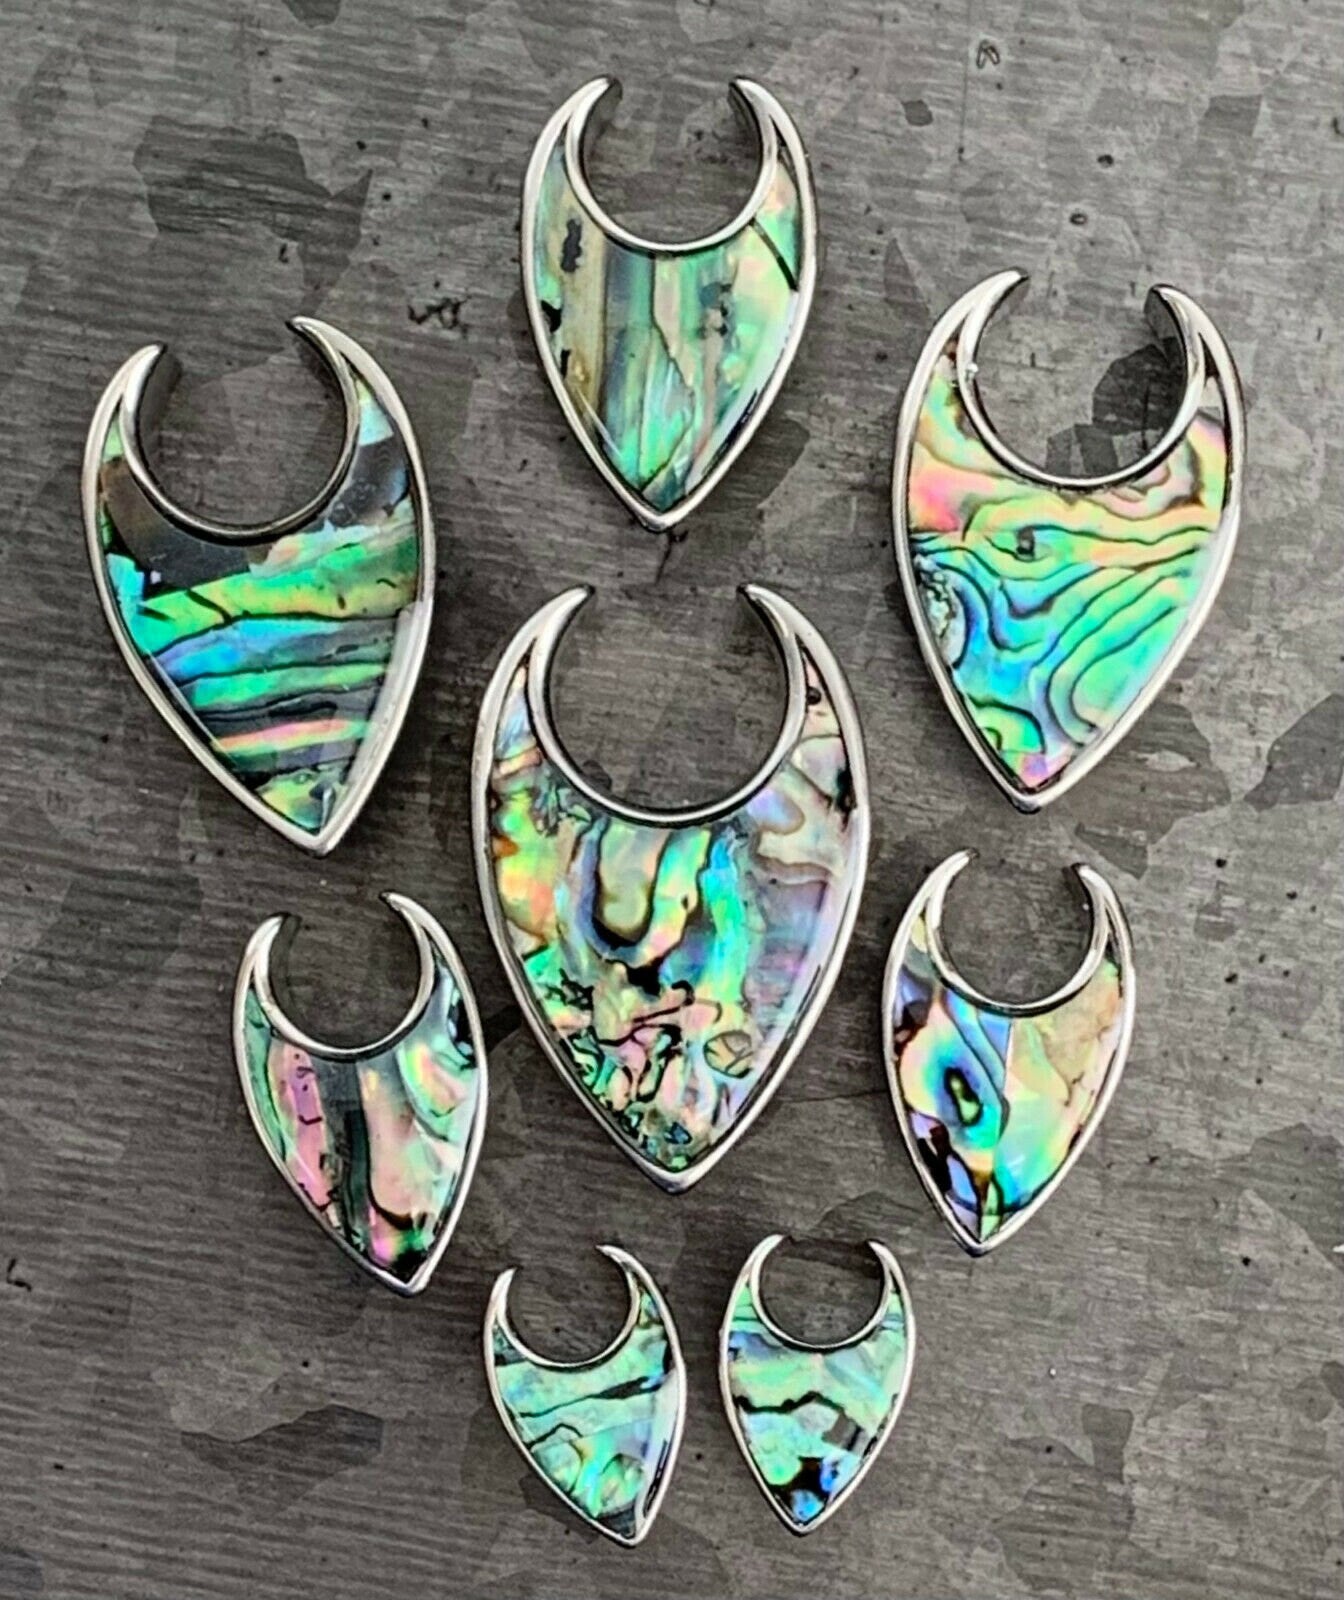 PAIR of Stunning Abalone Tear Drop Surgical Steel Saddle Ear Spreader Tunnels/Plugs/Hangers - Gauges 0g (8mm) thru 5/8" (16mm) available!